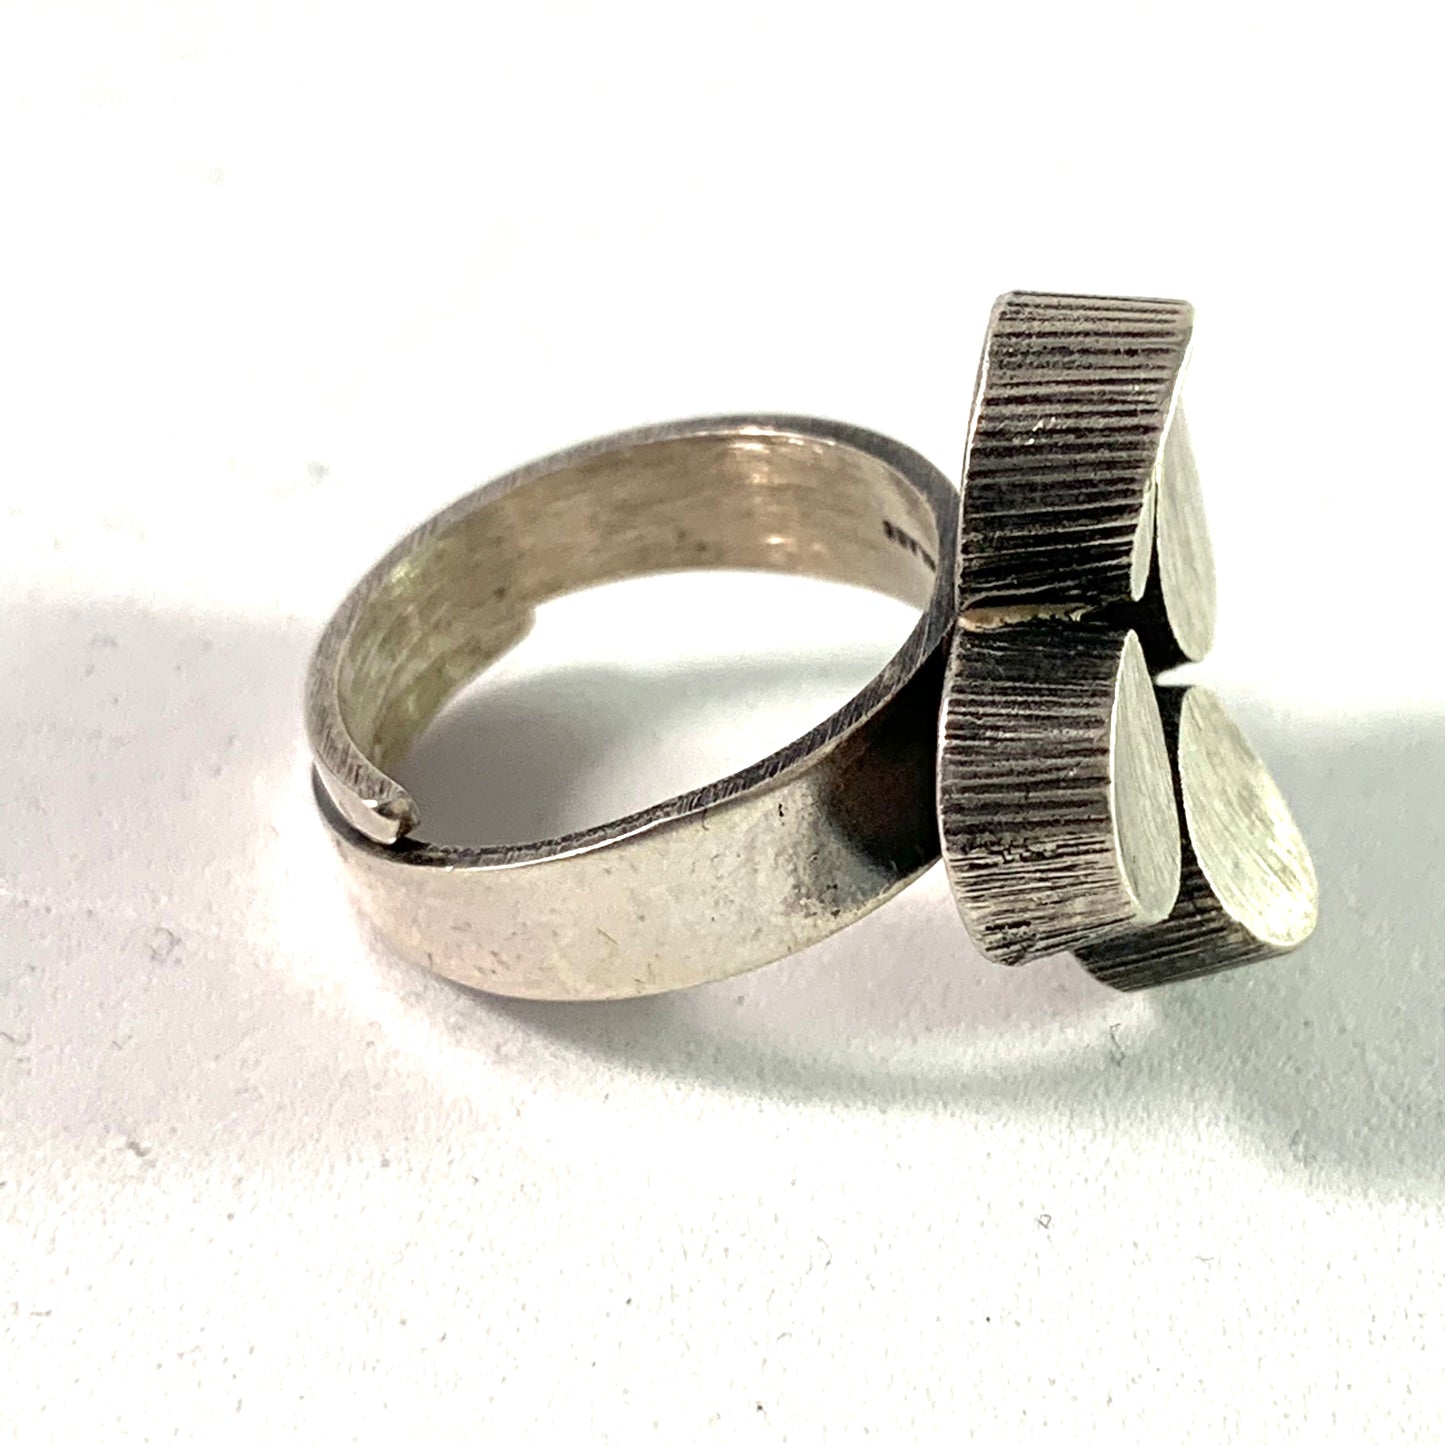 Karl Laine for Sten & Laine, Finland year 1973 Sterling Ring.